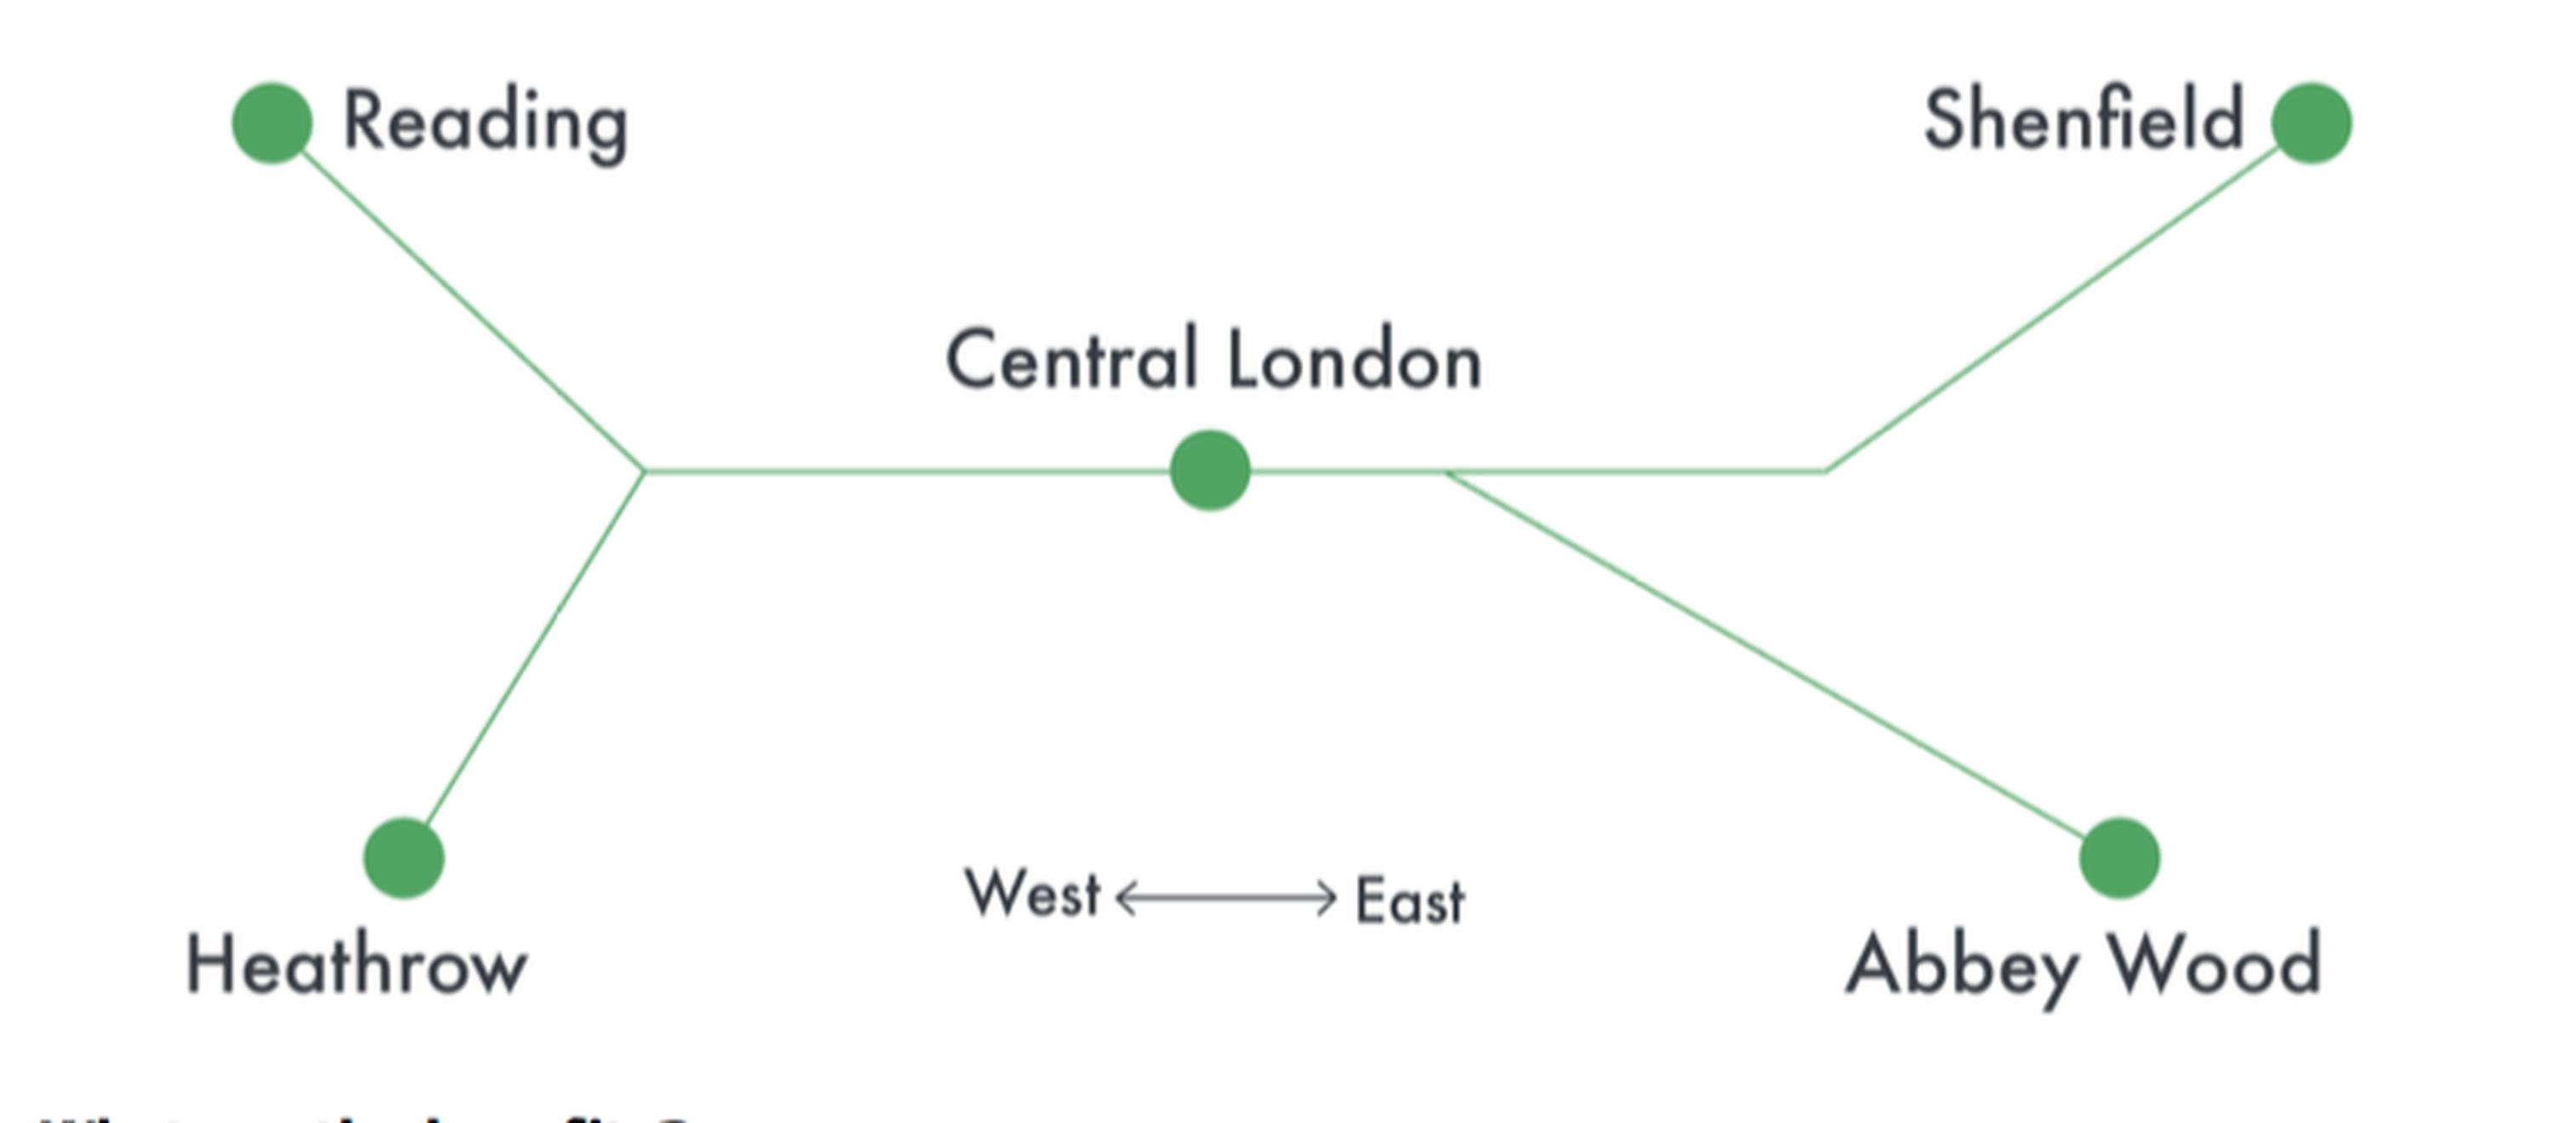 Crossrail will run from Reading and Heathrow (West) through to Central London to Shenfield and Abbey Wood (East).